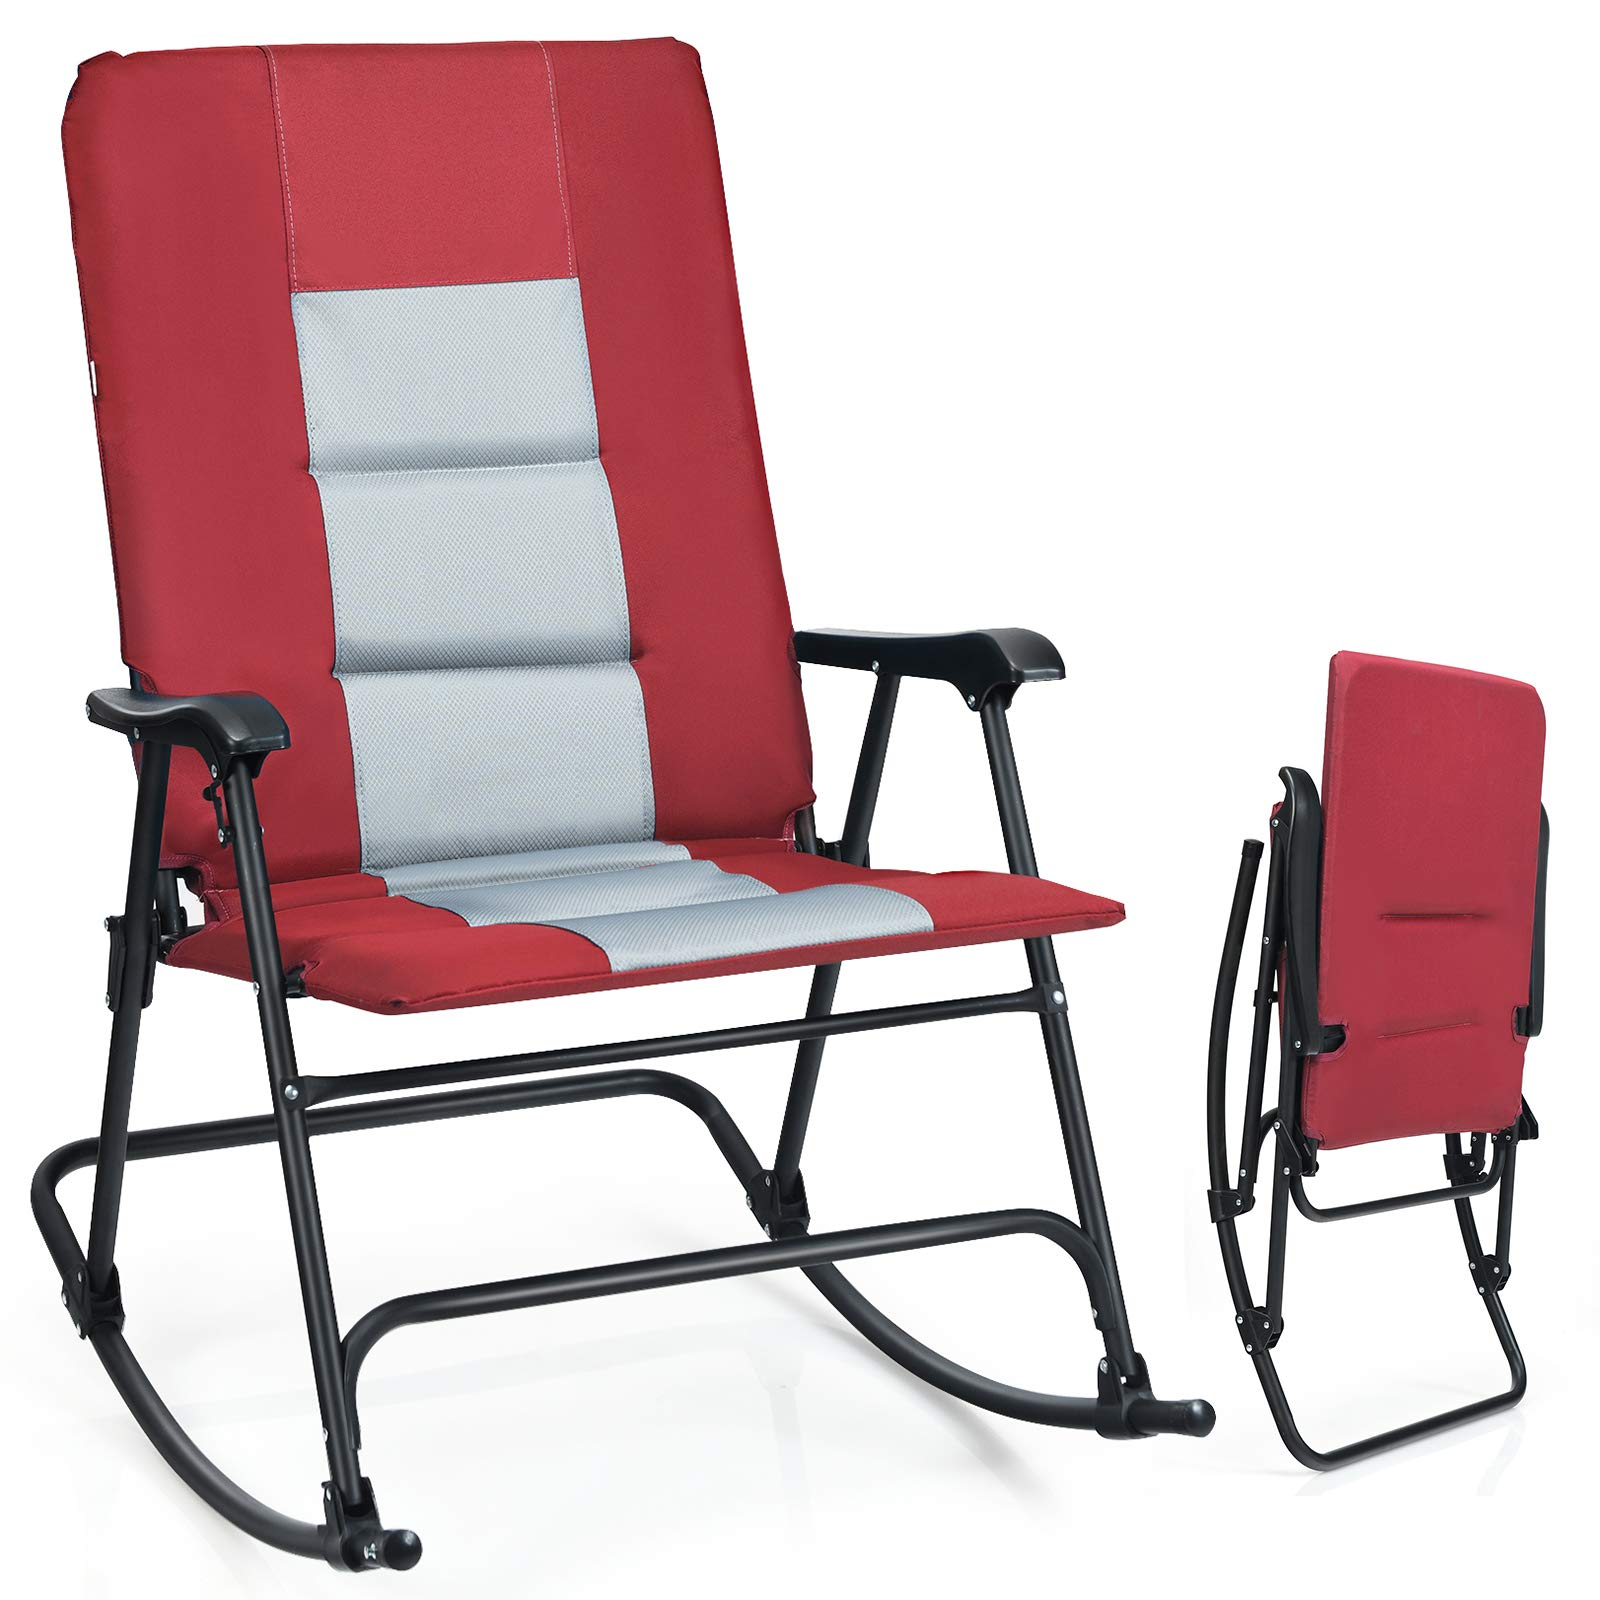 Giantex Camping Rocking Chair Fold-able Oversized with Padded Armrest and Seat